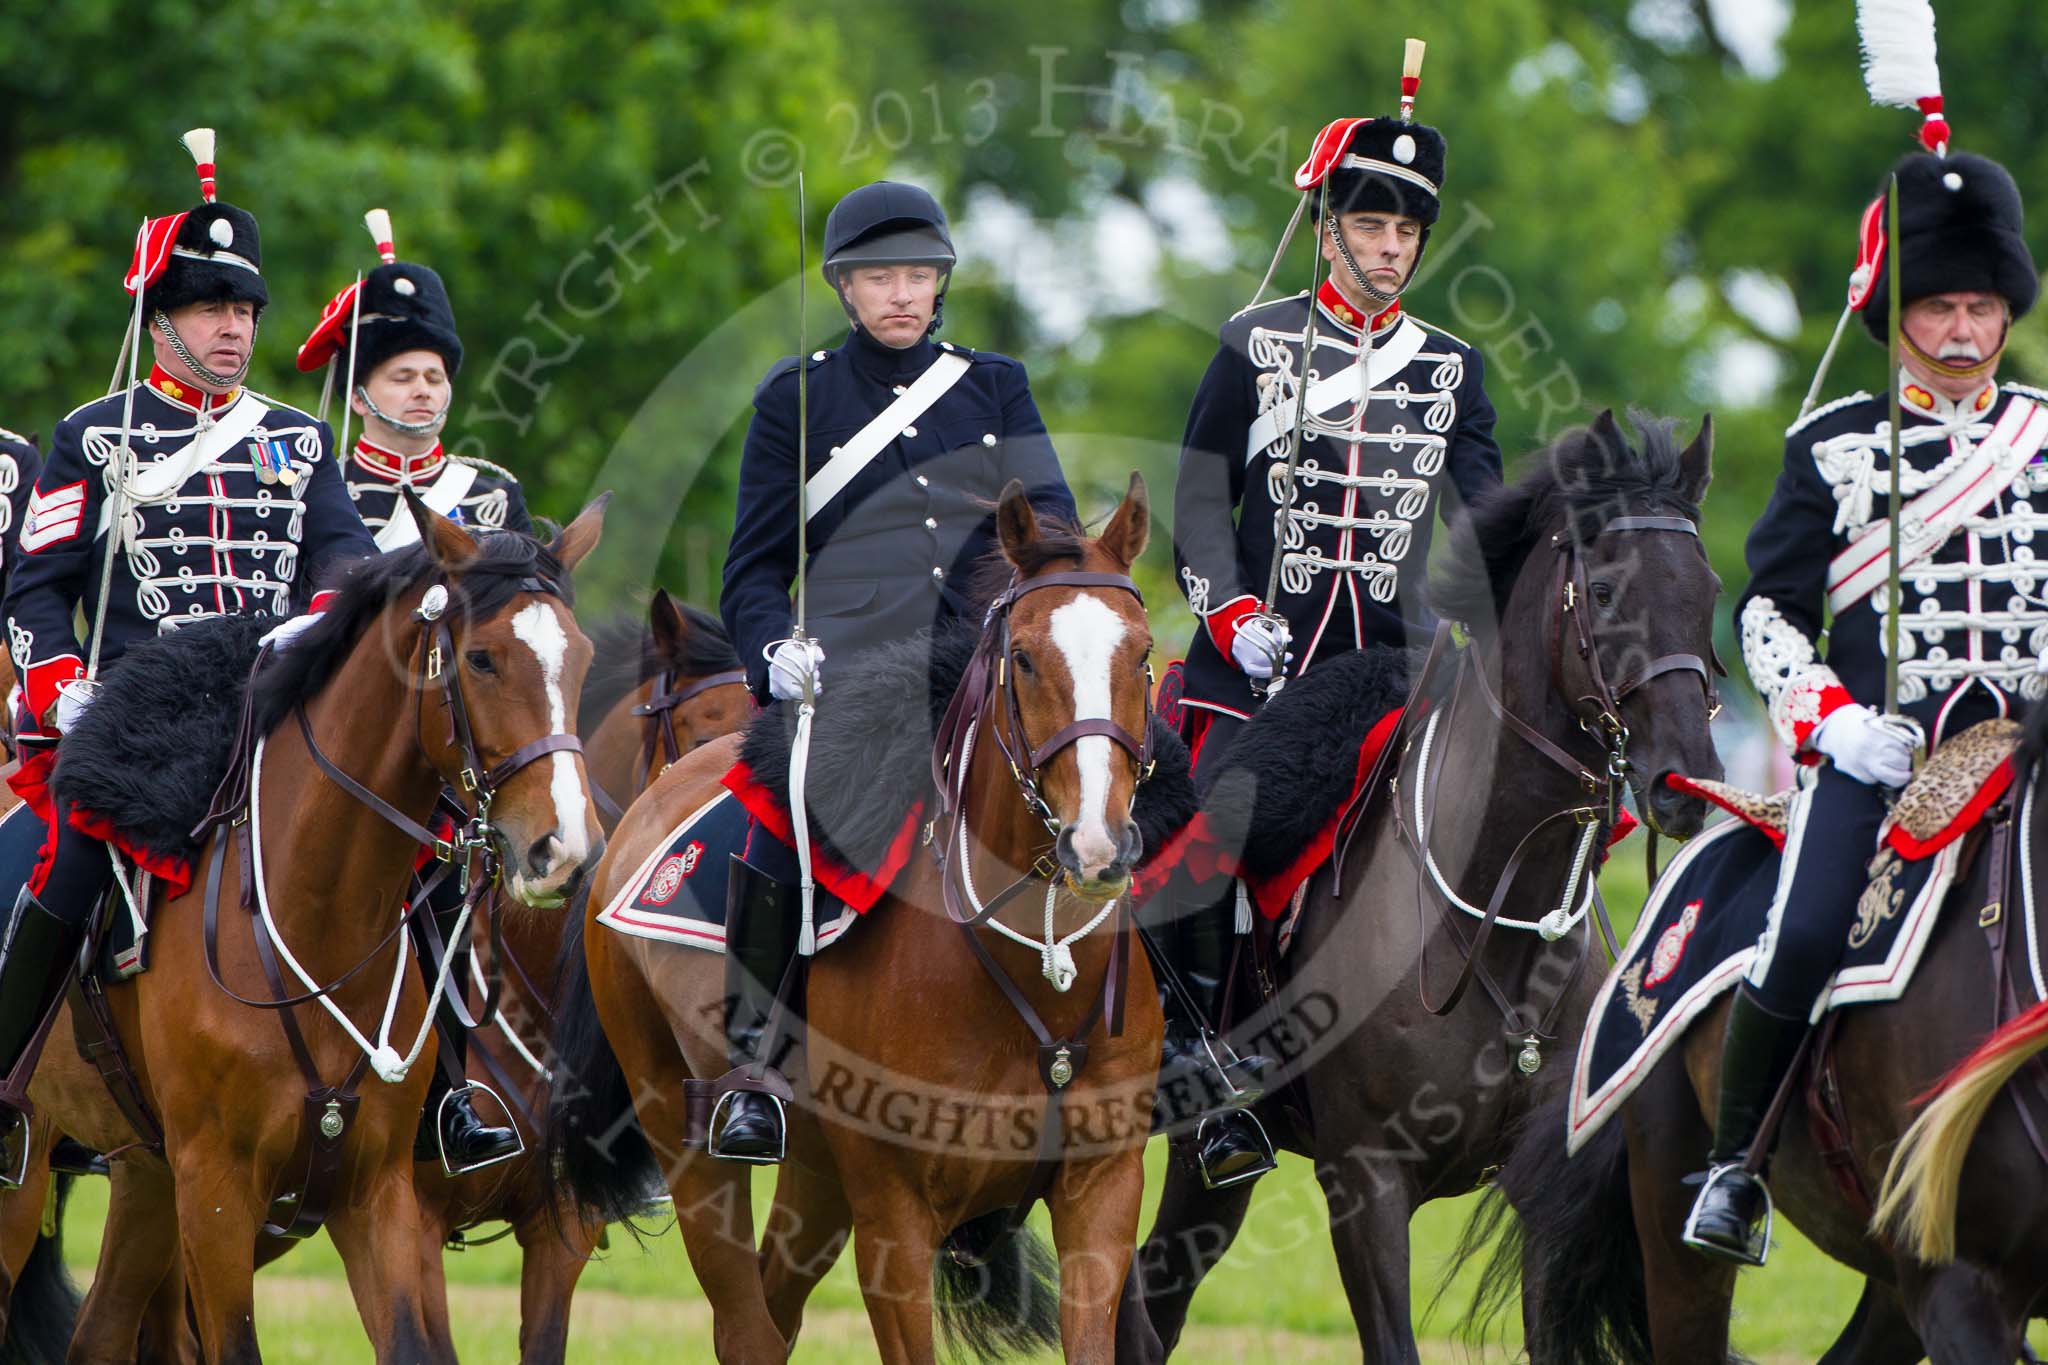 The Light Cavalry HAC Annual Review and Inspection 2013.
Windsor Great Park Review Ground,
Windsor,
Berkshire,
United Kingdom,
on 09 June 2013 at 13:35, image #445